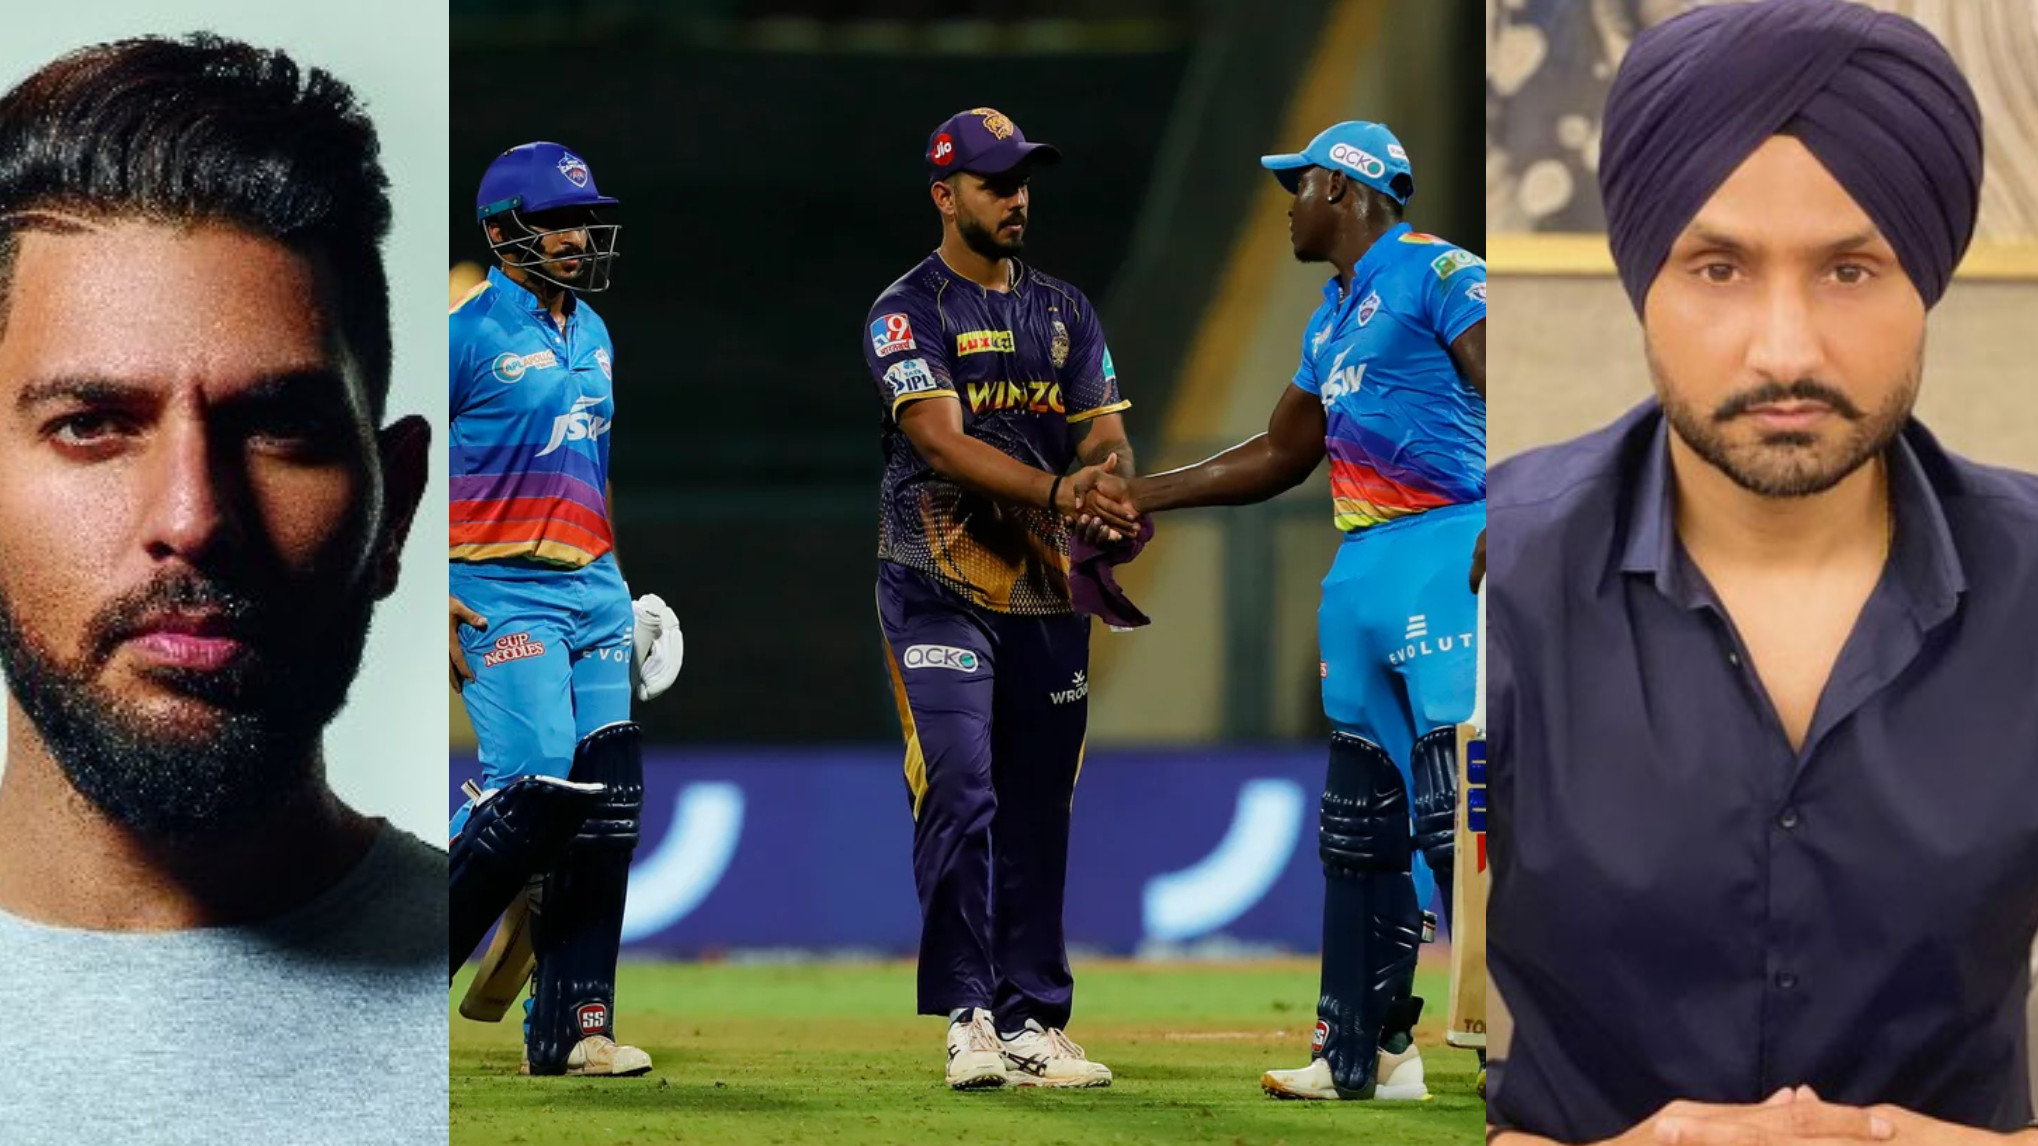 IPL 2022: Cricket fraternity reacts as DC win by 4 wickets to hand KKR their 5th loss in a row